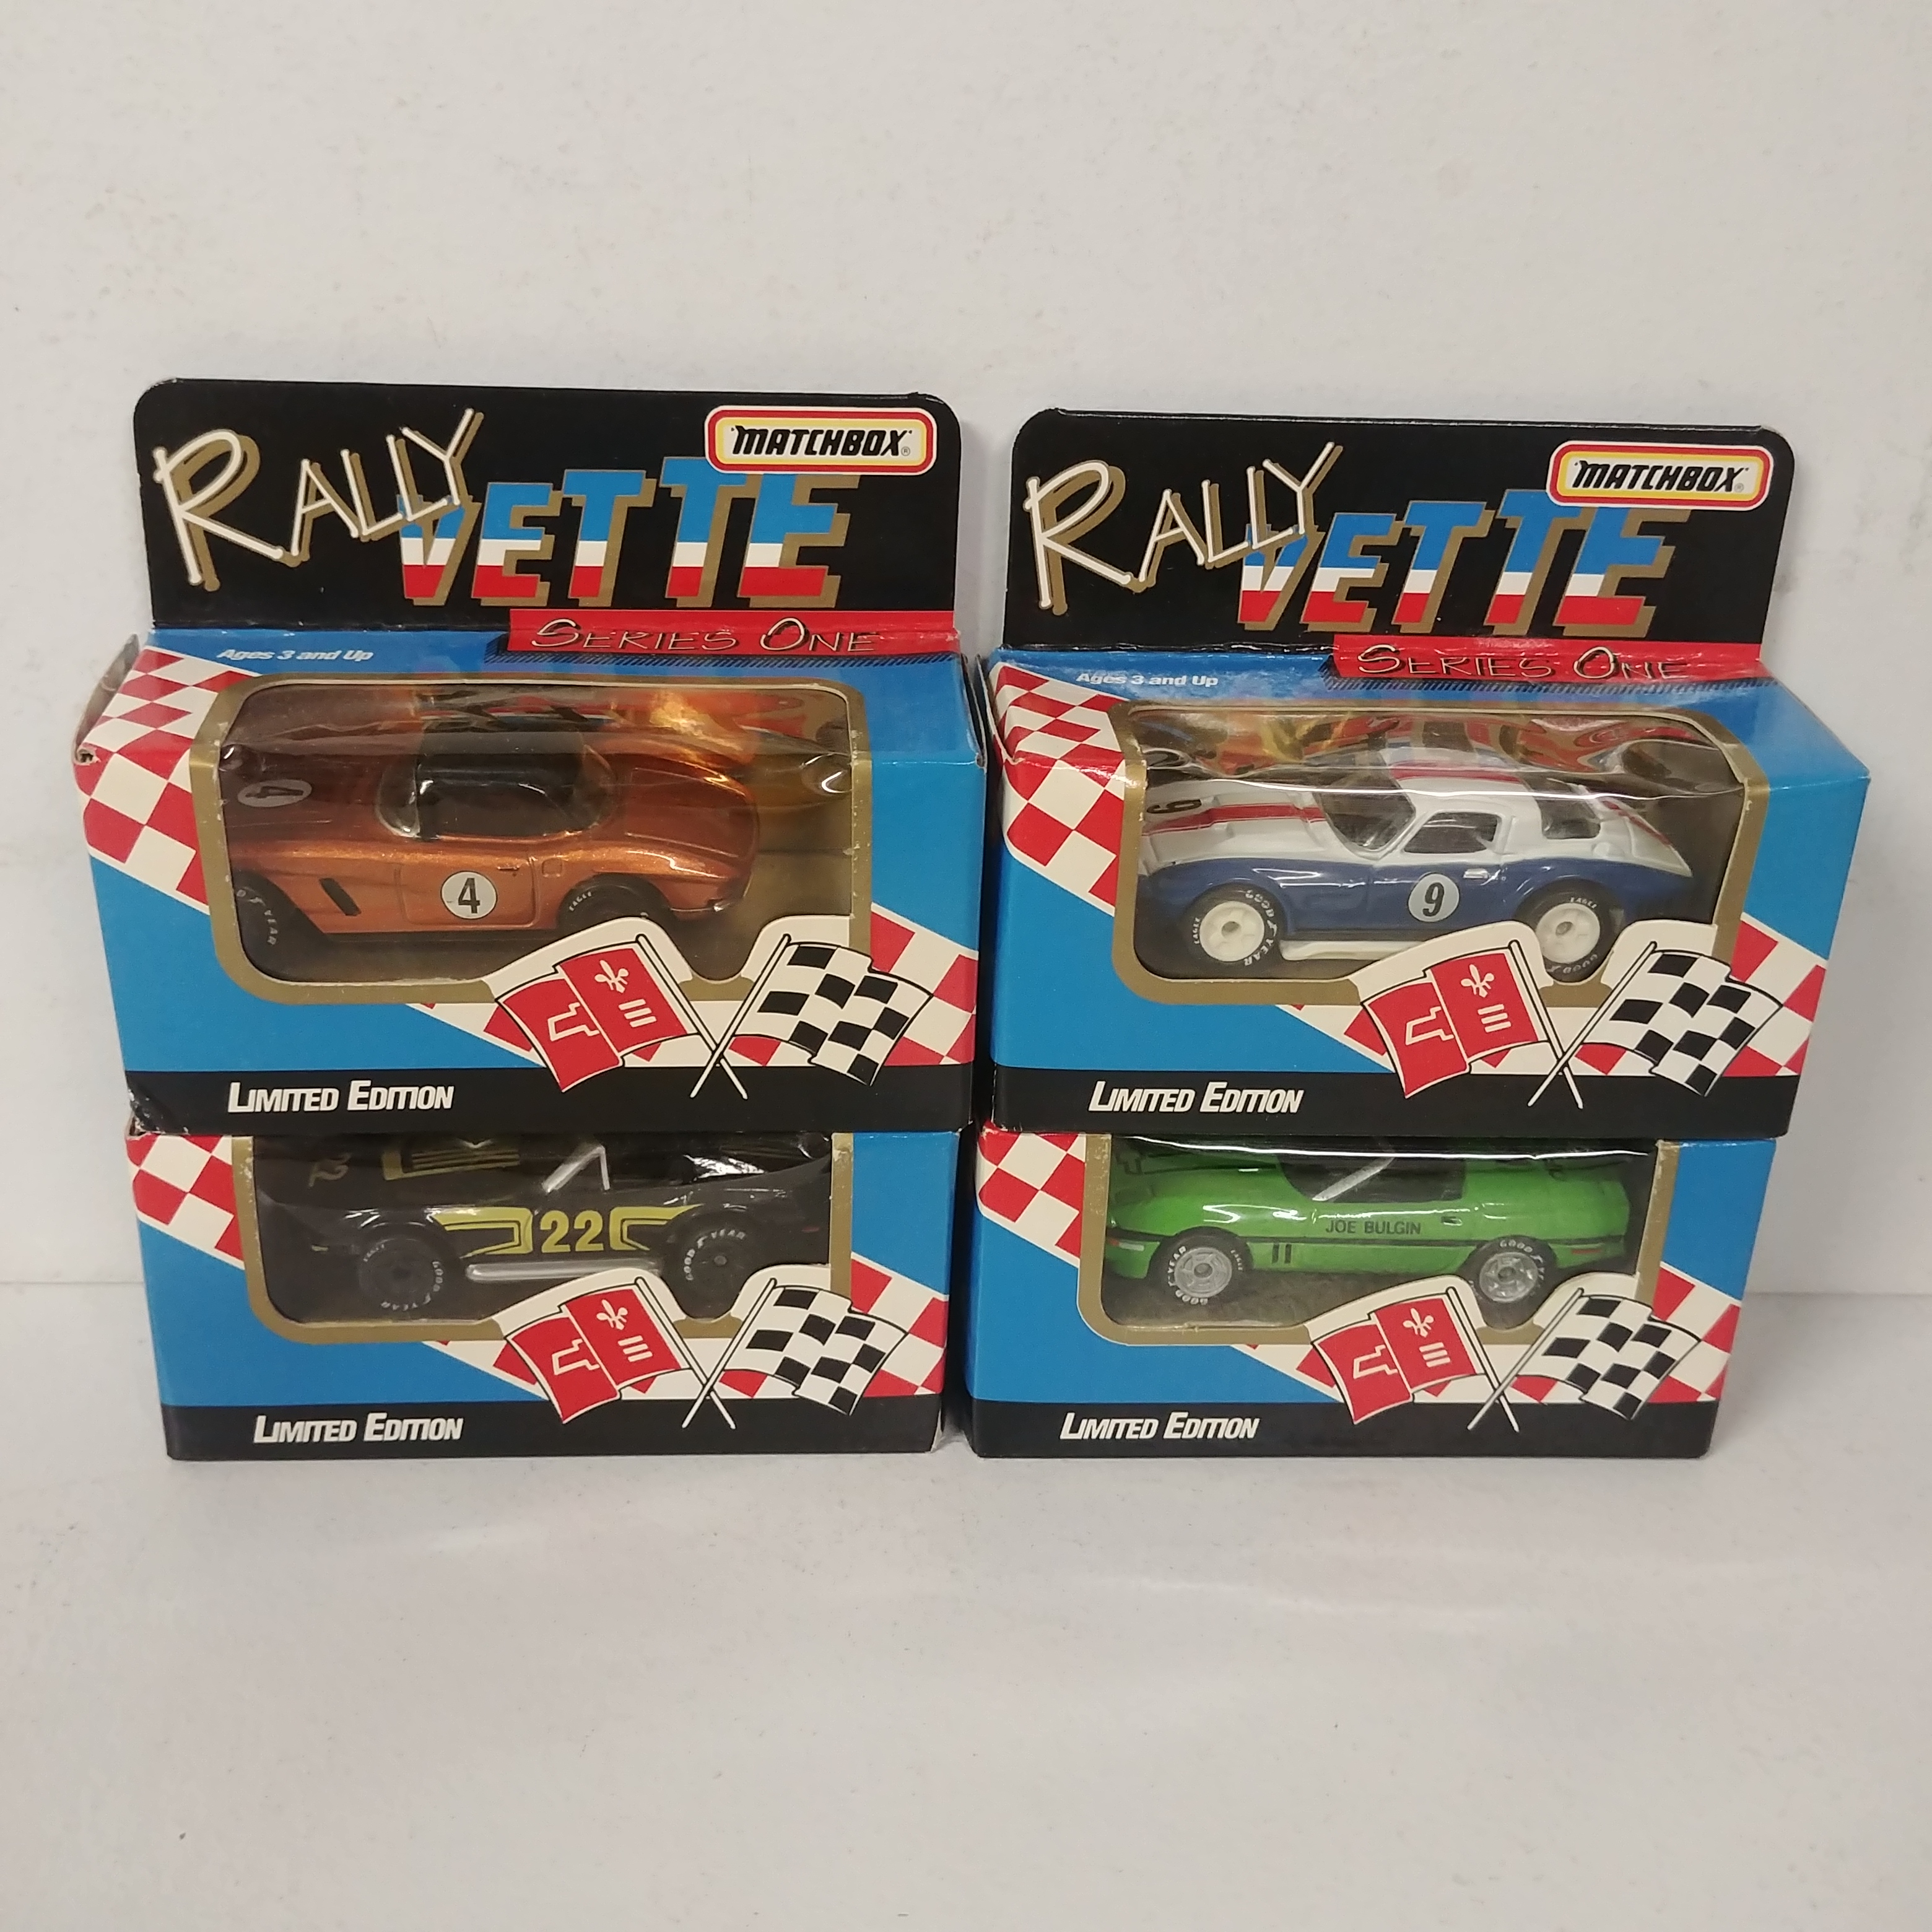 1992 Rally Vette 1/64th "Series One" set of four